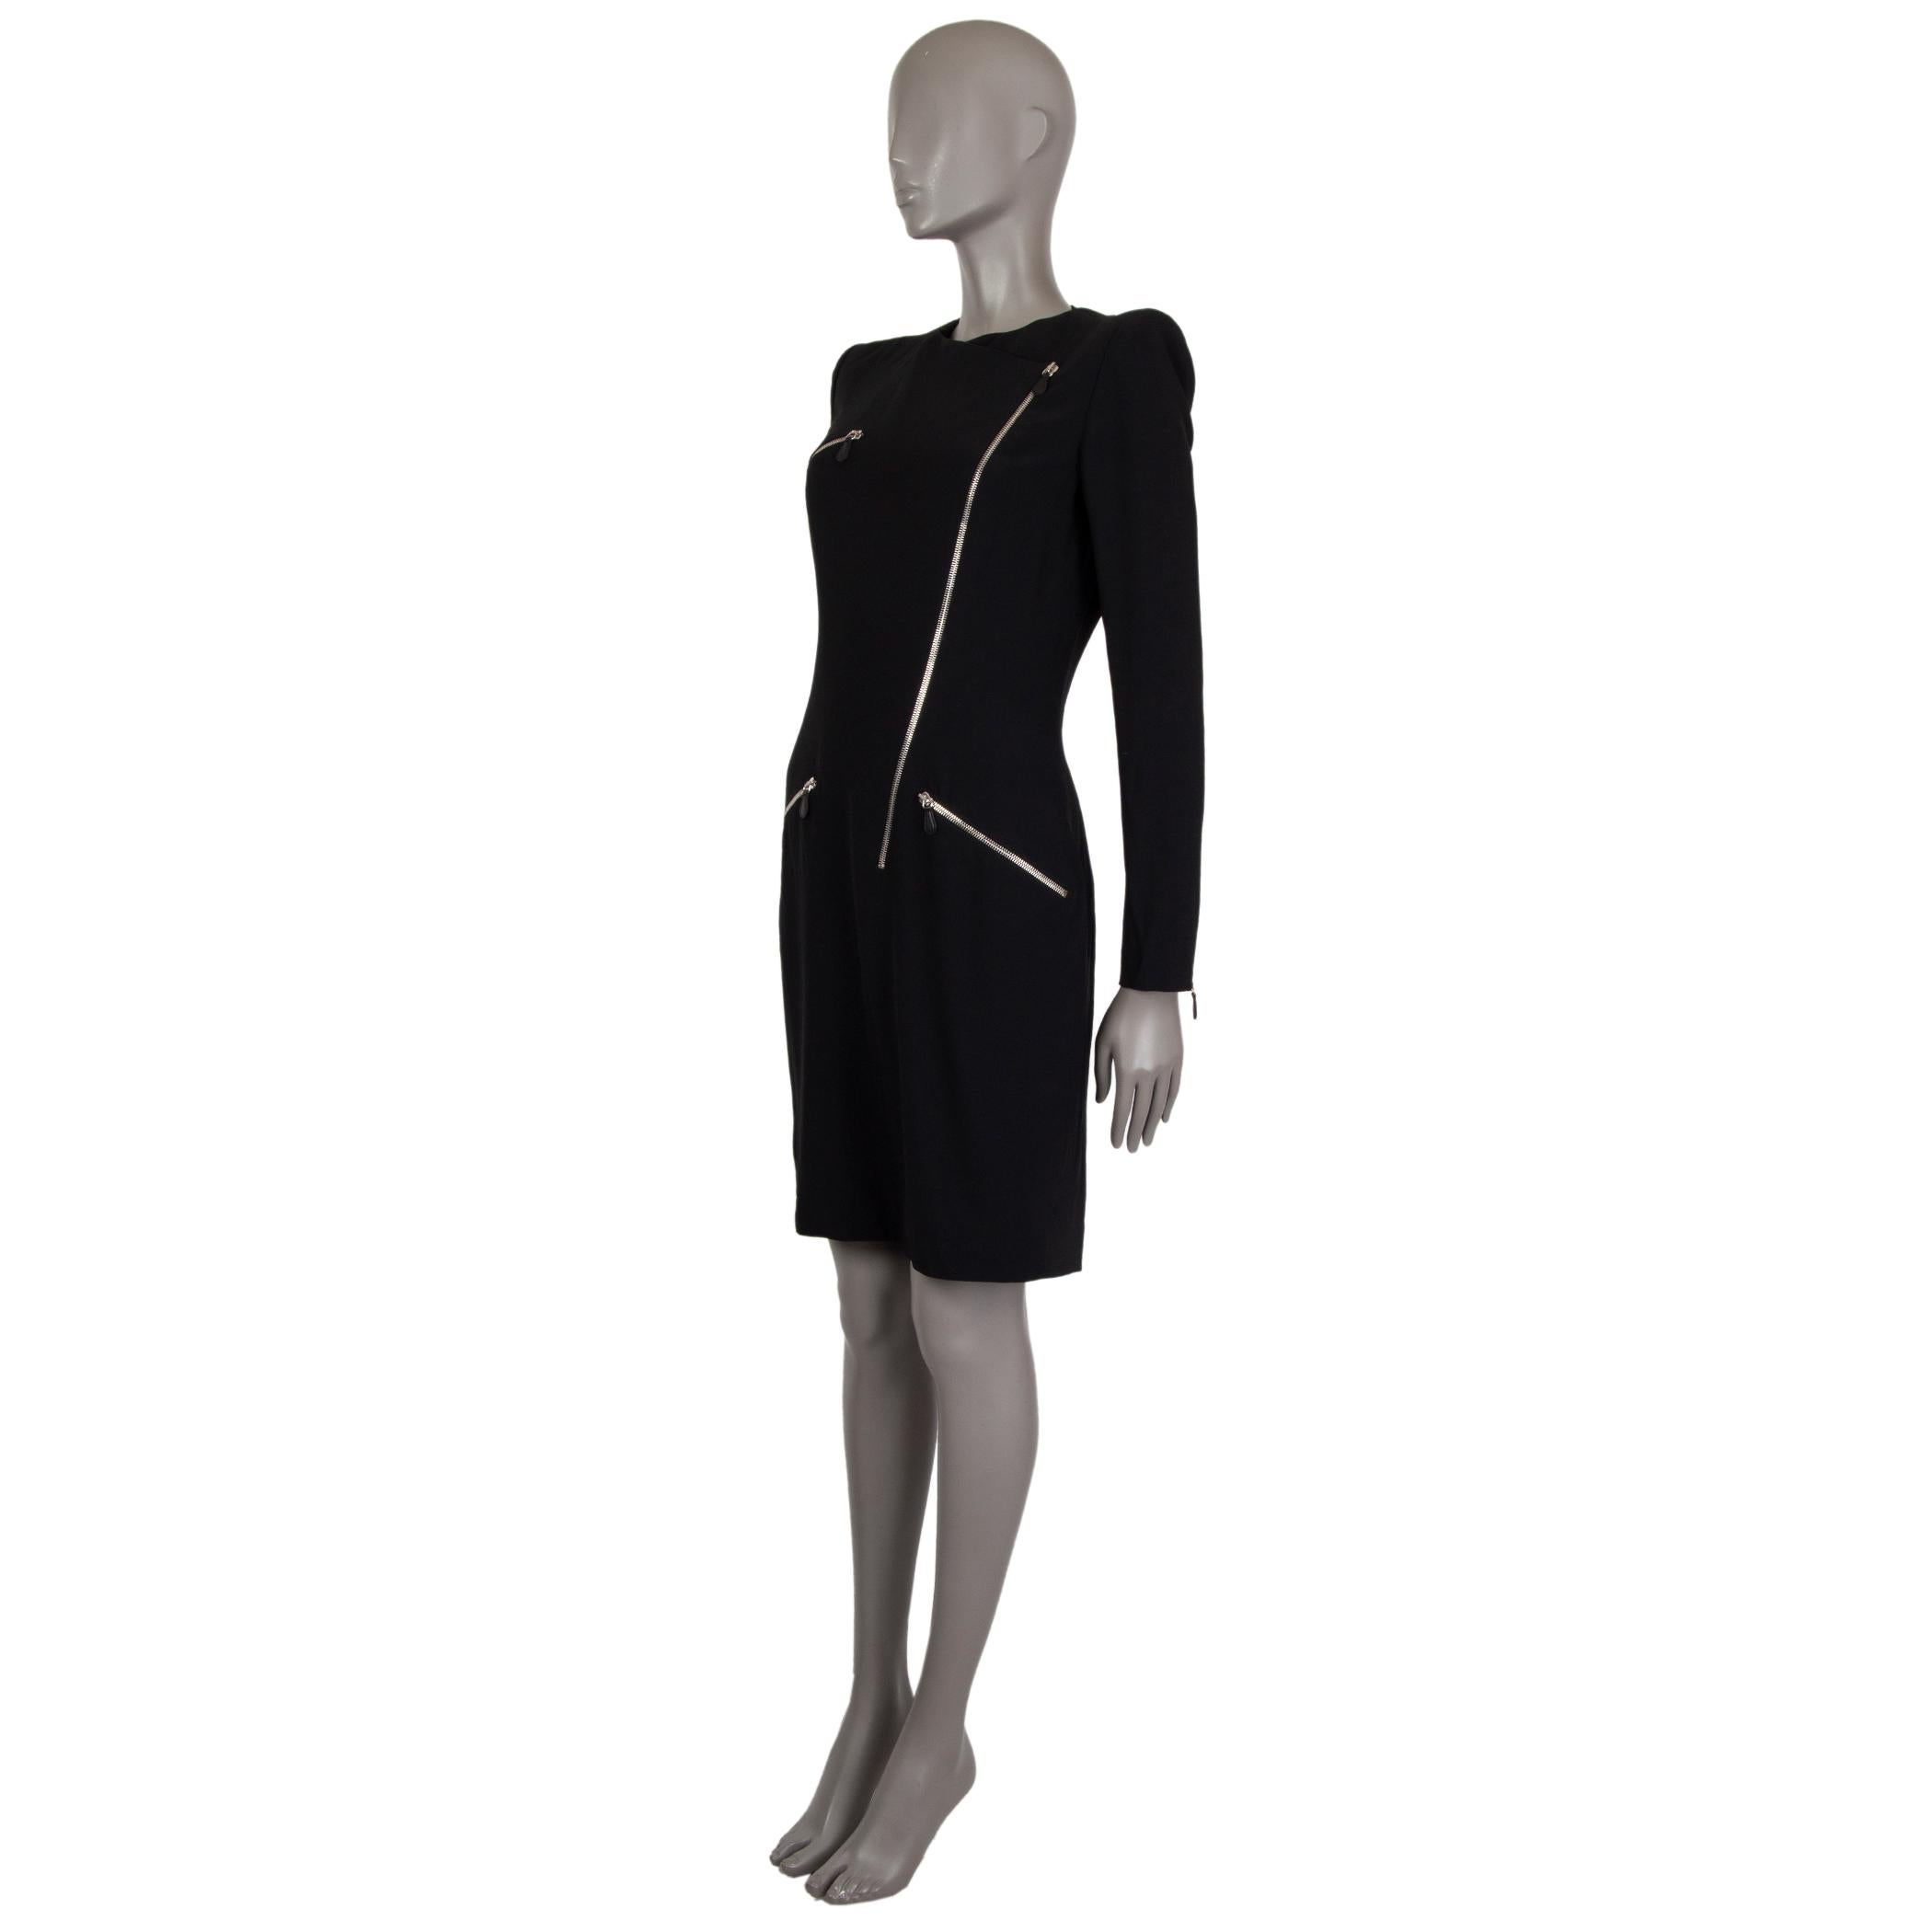 Alexander McQueen cross-zipper long-sleeve dress in black acetate (50%) and viscose (50%) with an asymmetrical neckline. Has one chest zipper and two frontal asymmetrical zippers. Closes with a silver tone zipper on the front. Lined in acetate (74%)